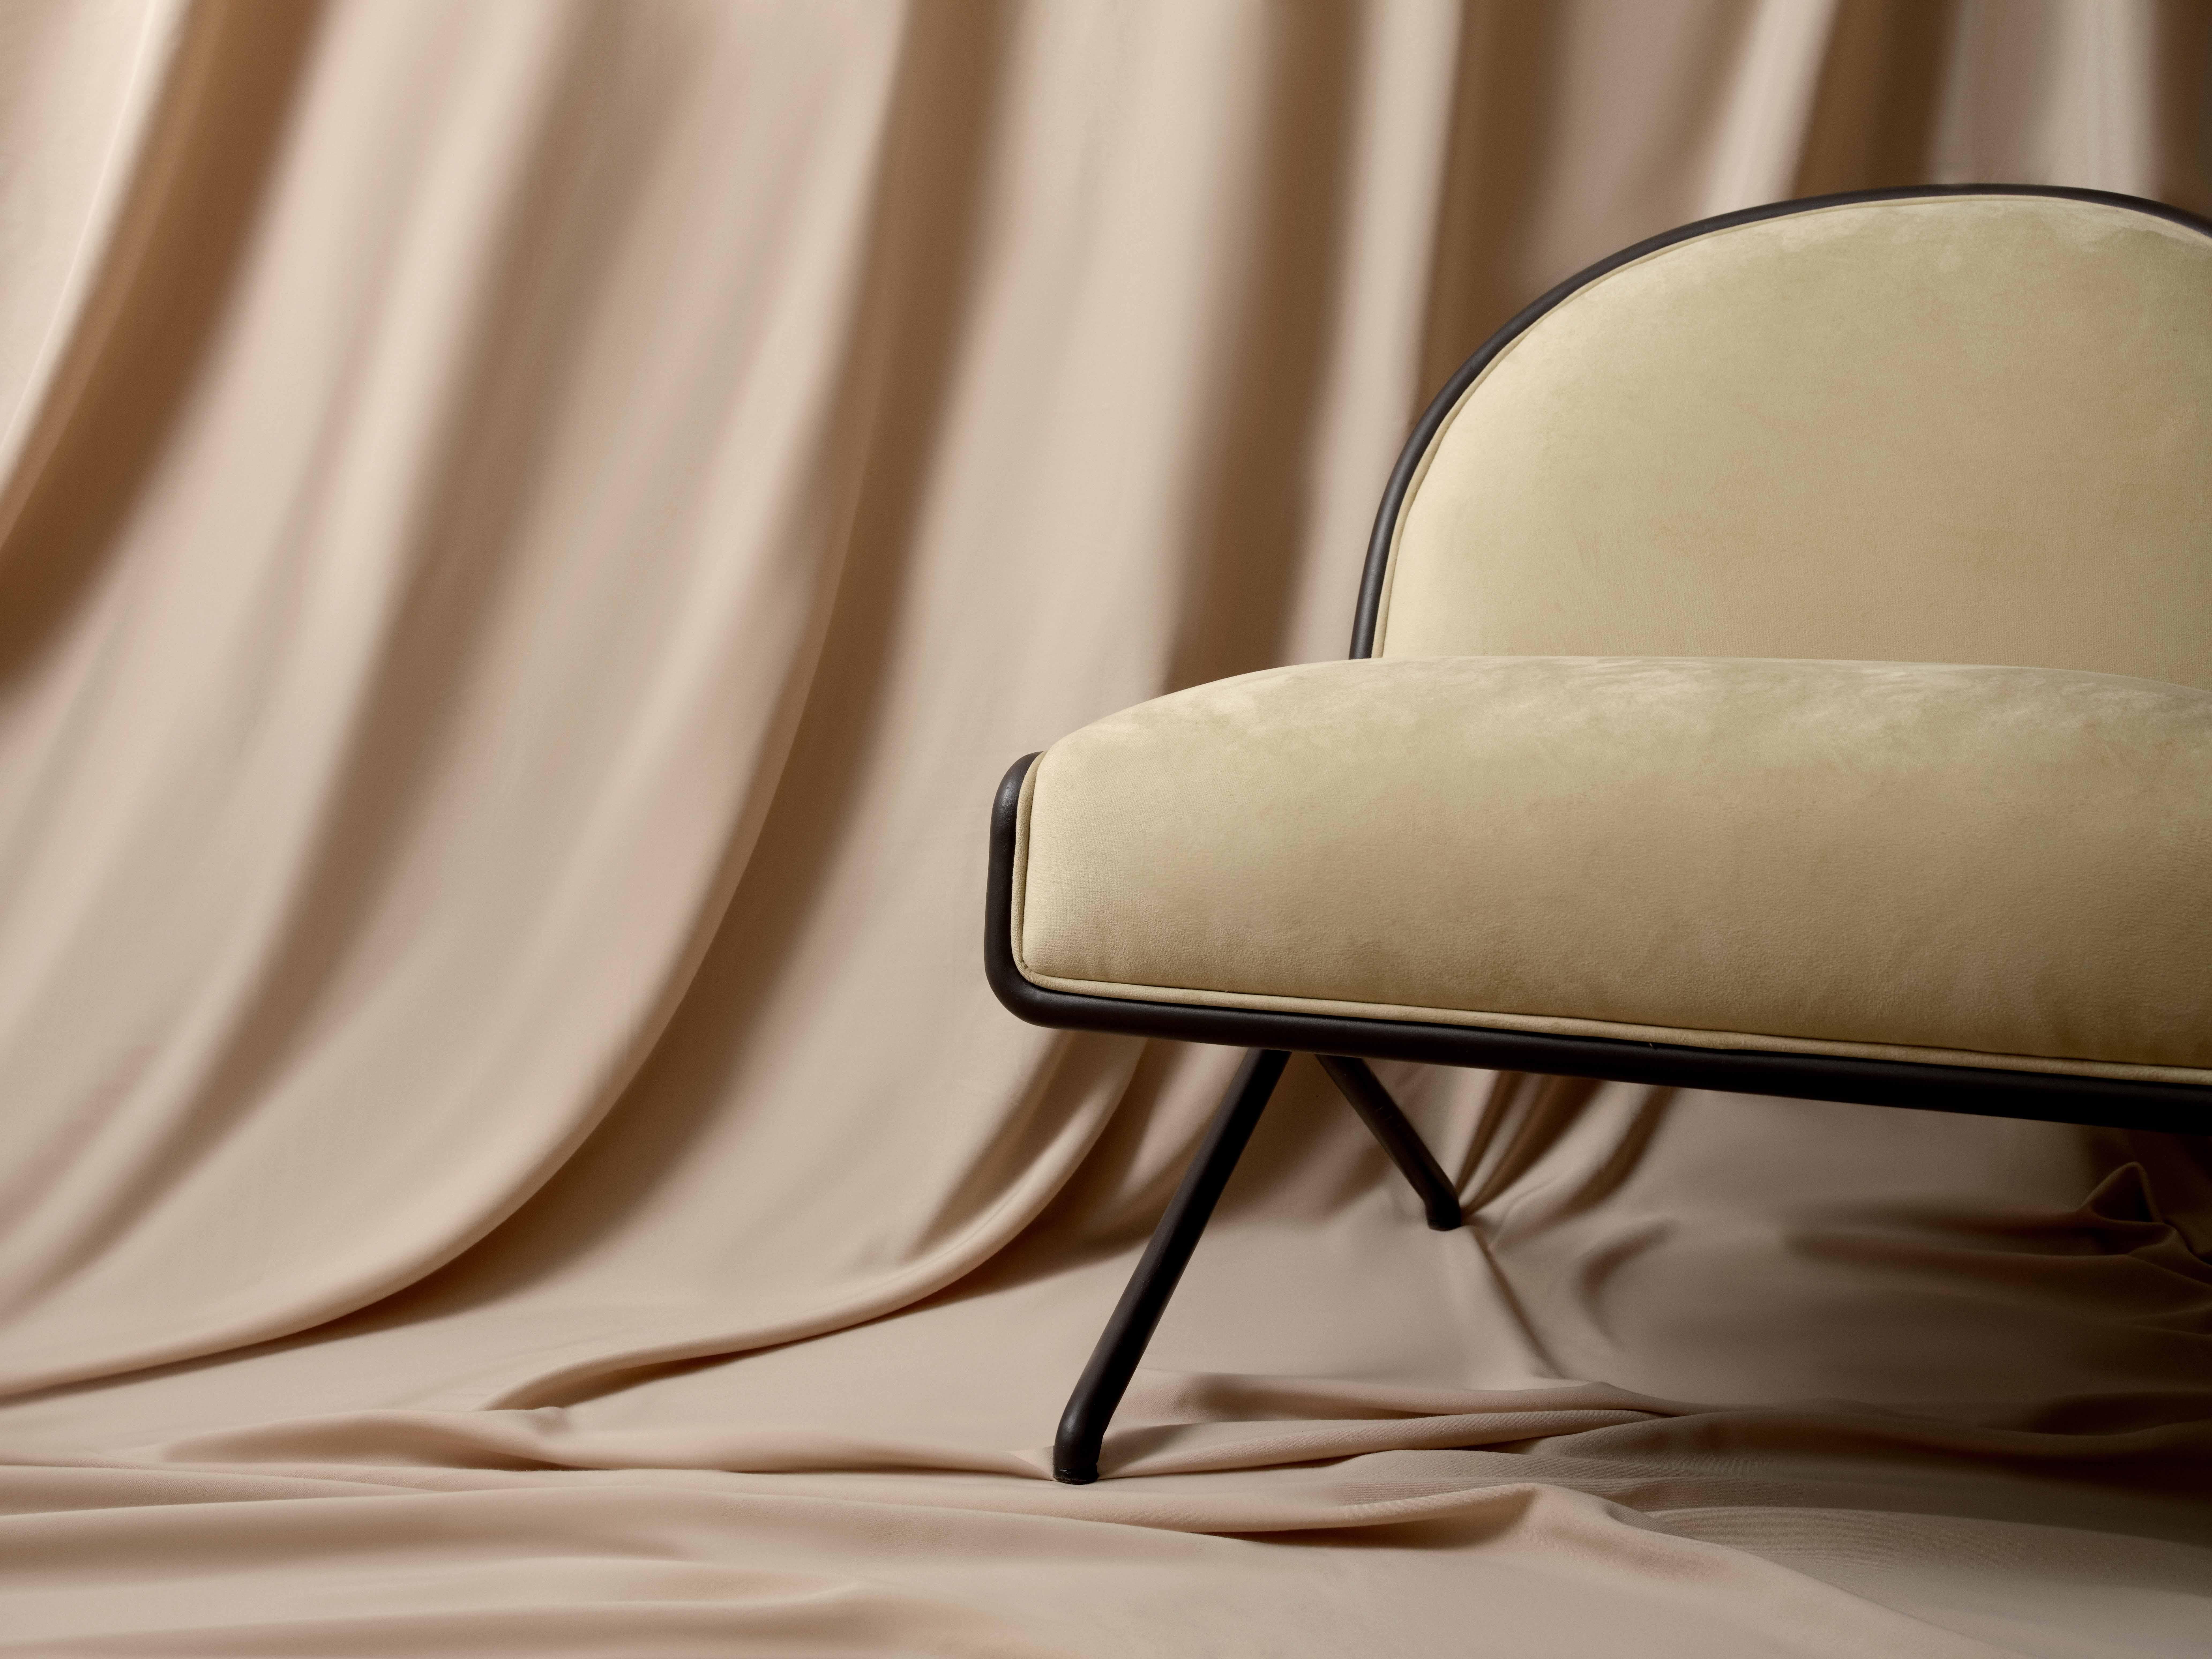 ‘Yalın Armchair’ has a perfect balance between functionality and design. Delicate feet resembling a flamingo and ergonomic design combine to bring the product to life.